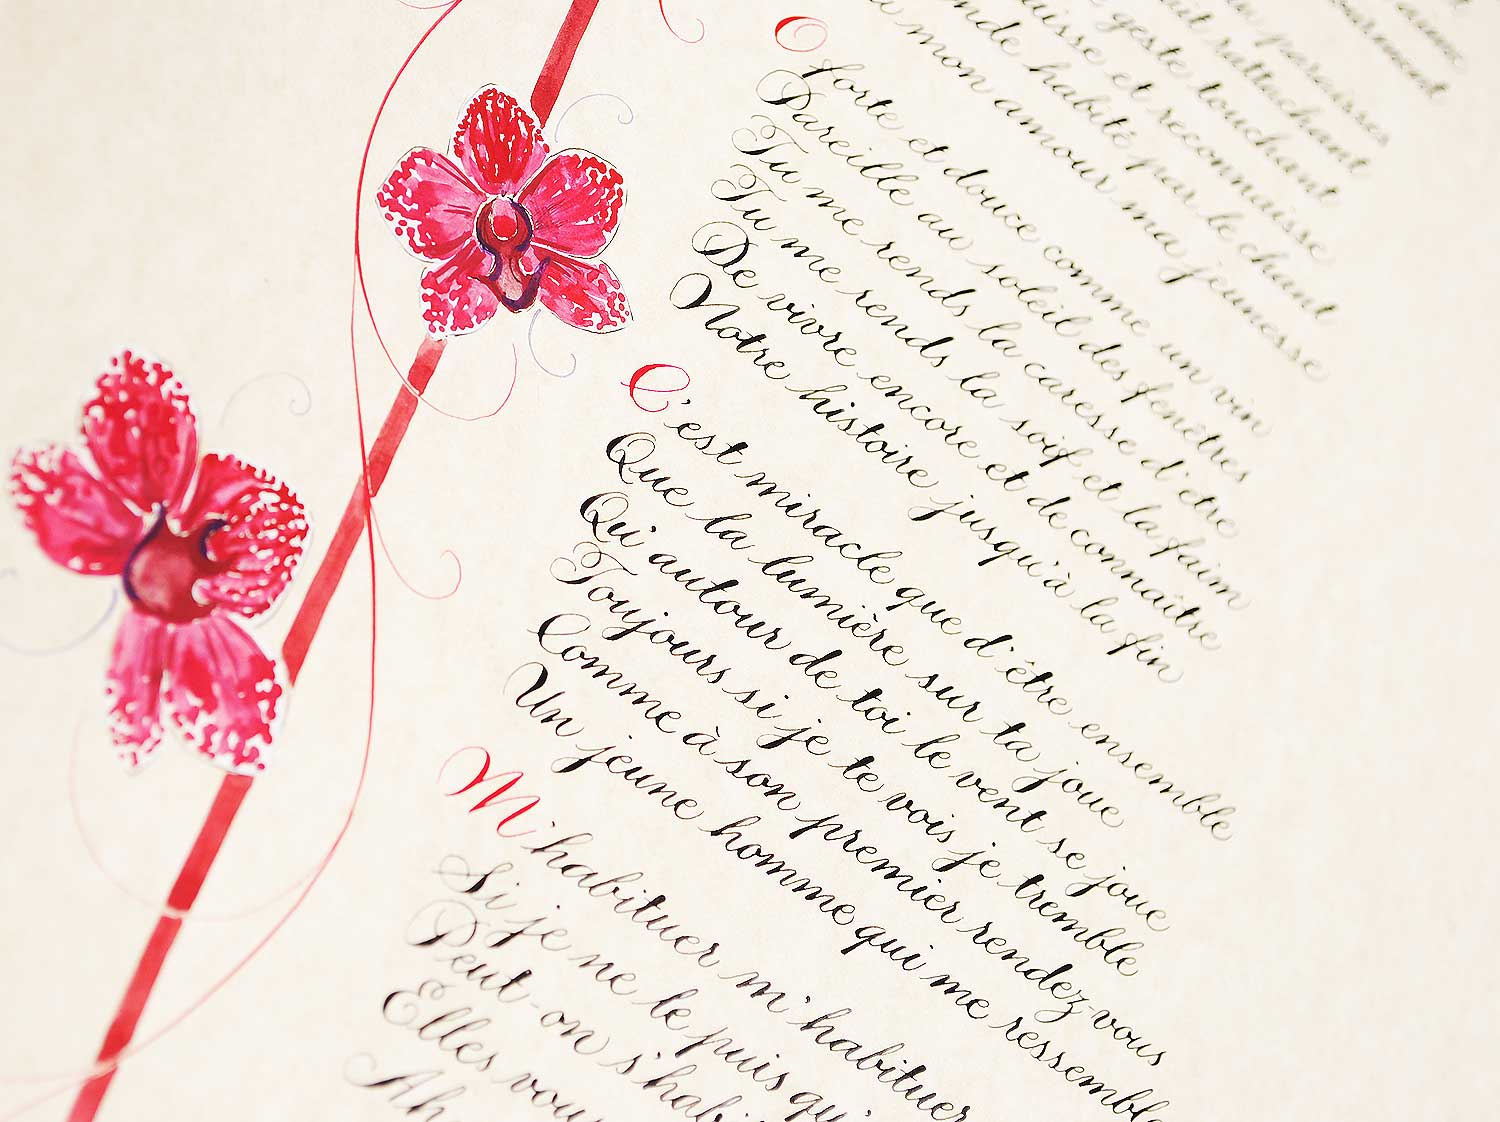 Orchid illustration for a calligraphy poem commission in French. 